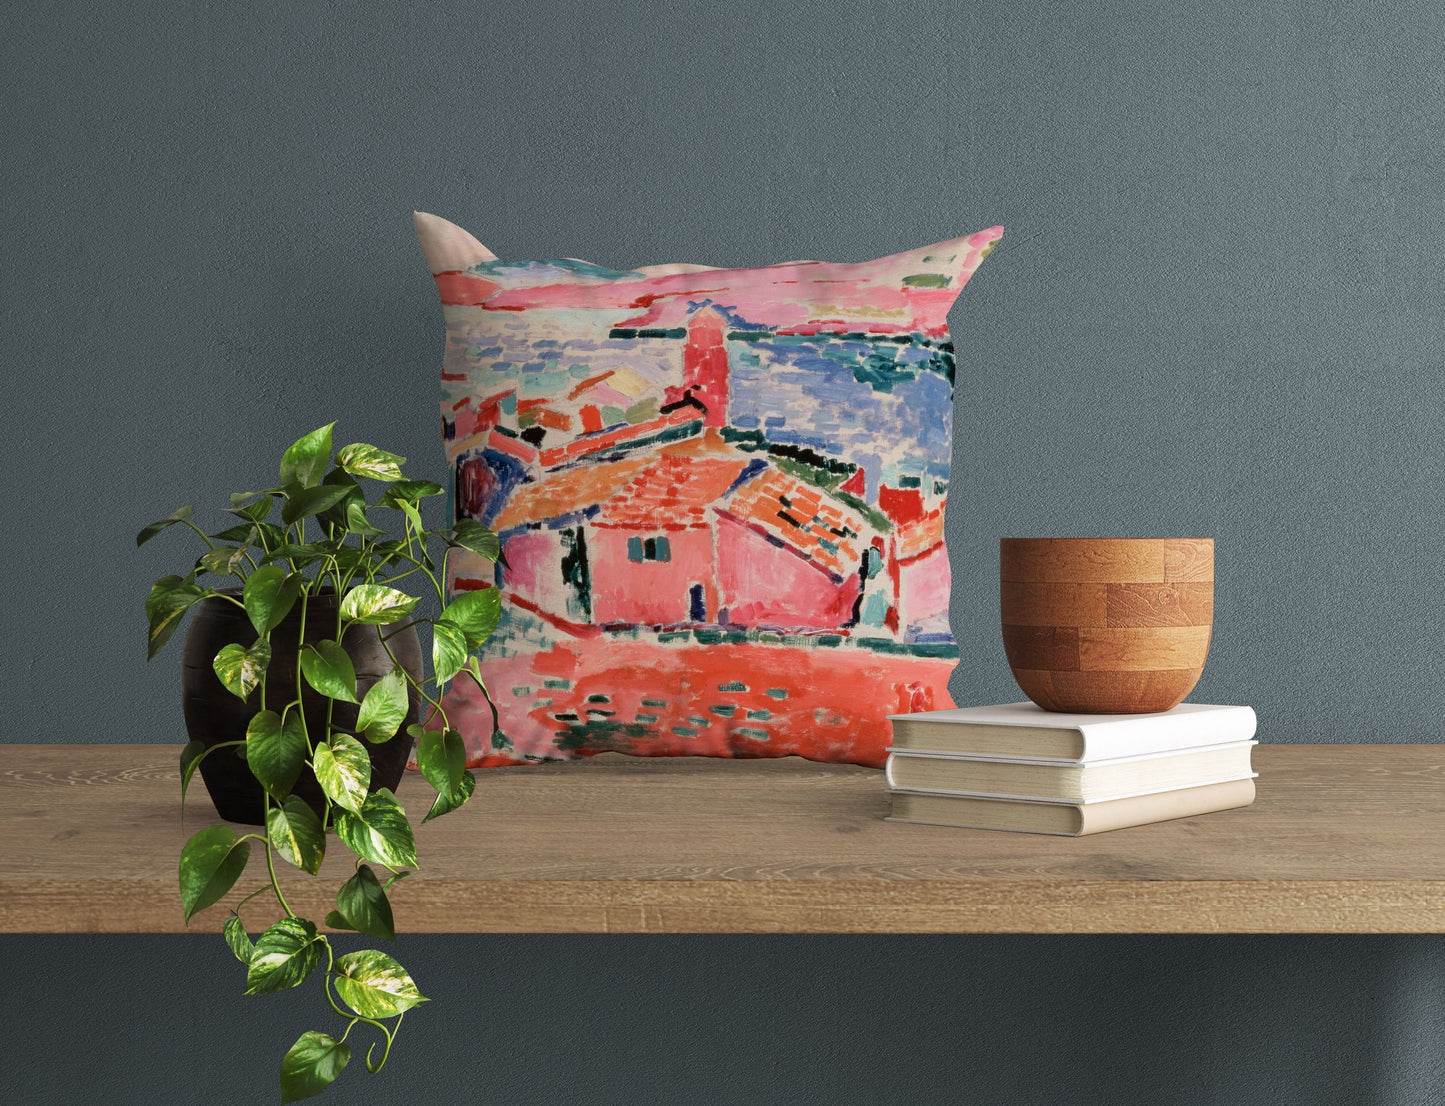 Henri Matisse Famous Art, Pillow Case, Abstract Throw Pillow Cover, Colorful Pillow Case, Contemporary Pillow, Indoor Pillow Cases